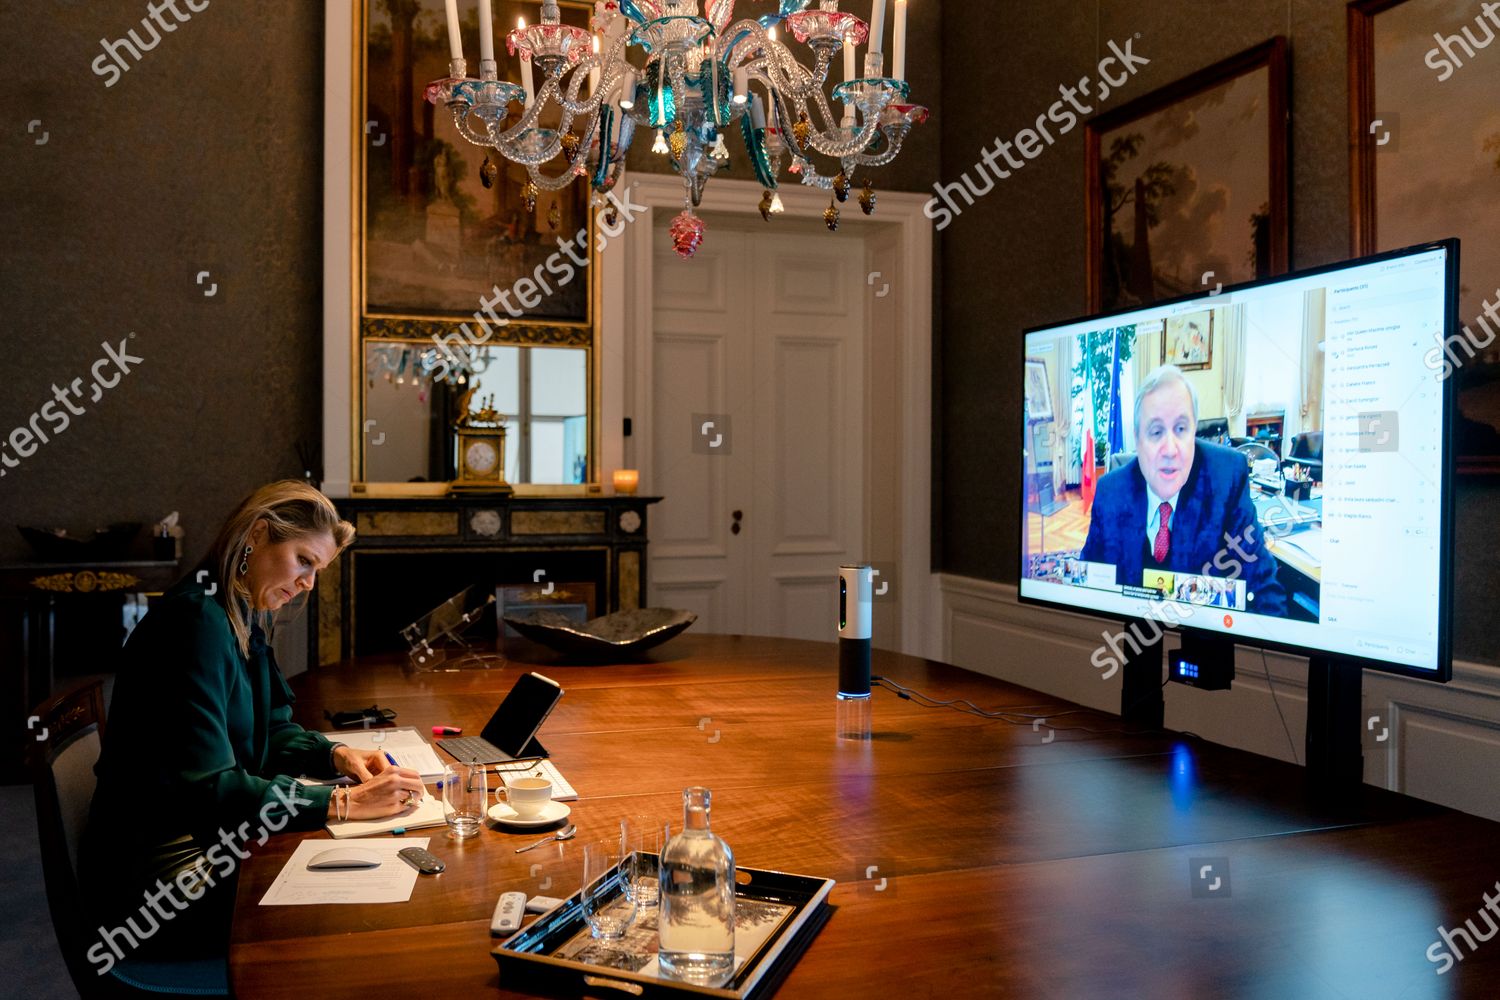 queen-maxima-video-conference-the-hague-the-netherlands-shutterstock-editorial-11086765d.jpg